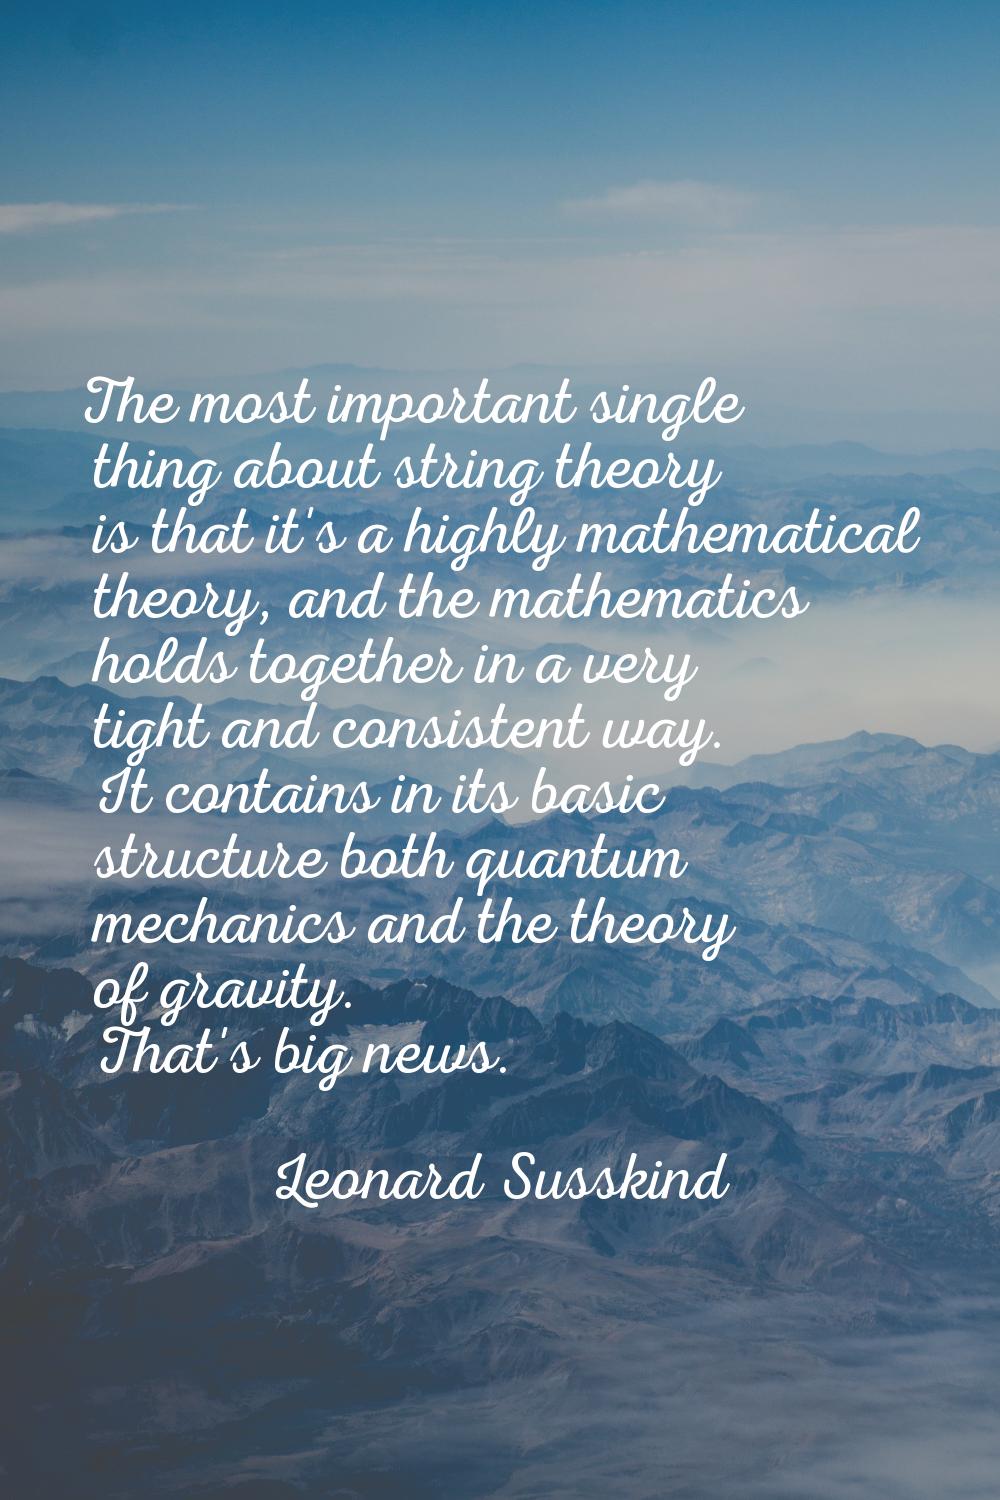 The most important single thing about string theory is that it's a highly mathematical theory, and 